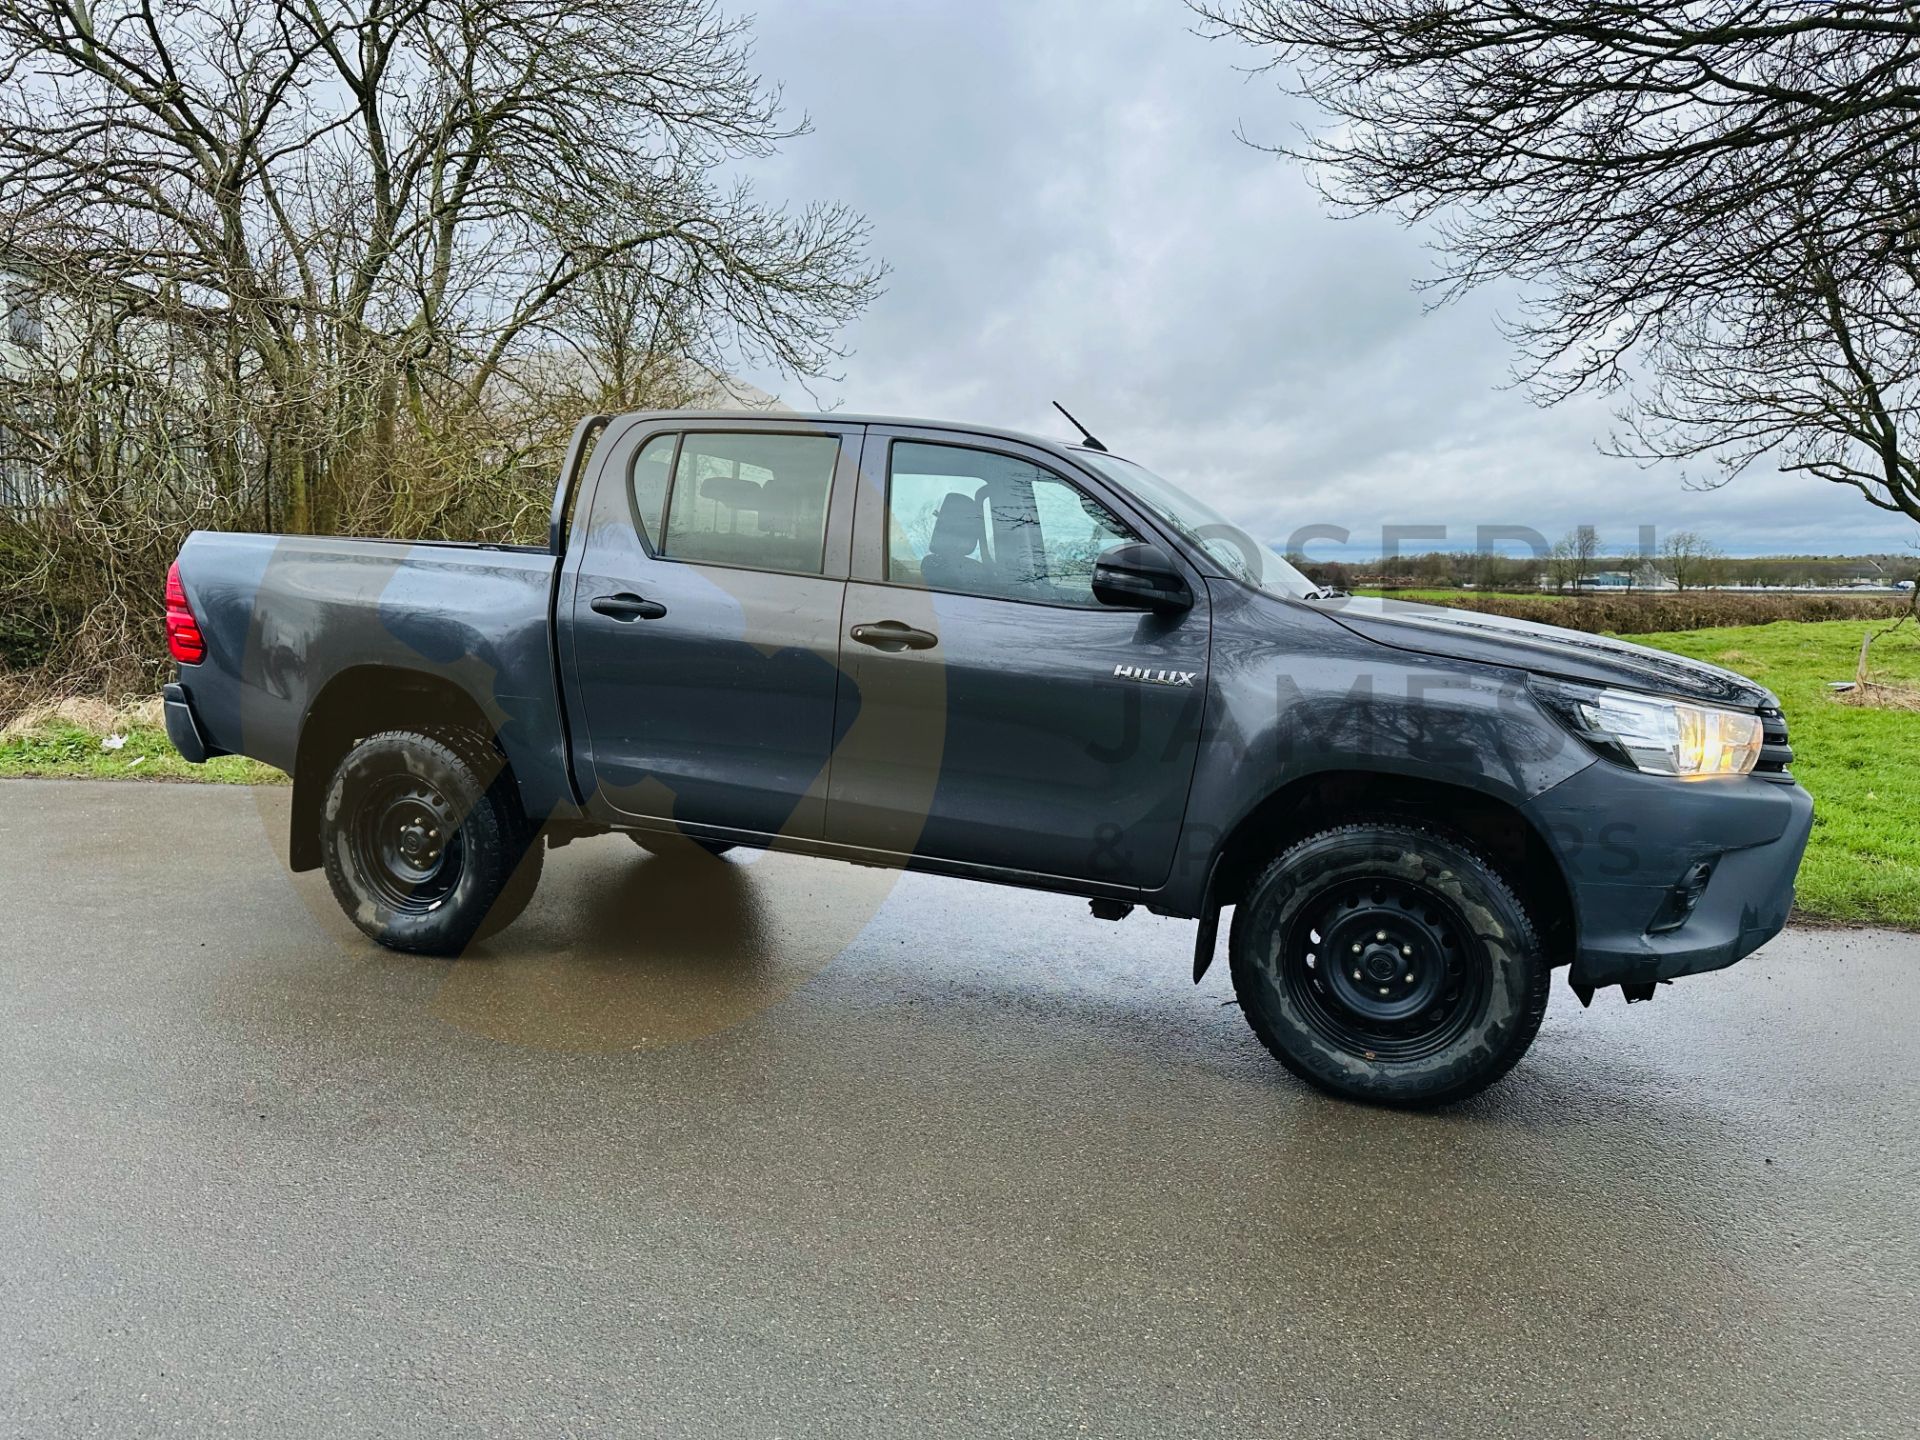 TOYOTA HILUX 2.4 D4-D "ACTIVE" D/CAB 4 DOOR - 2020 MODEL - 1 OWNER - ONLY 41K MILES - AIR CON - LOOK